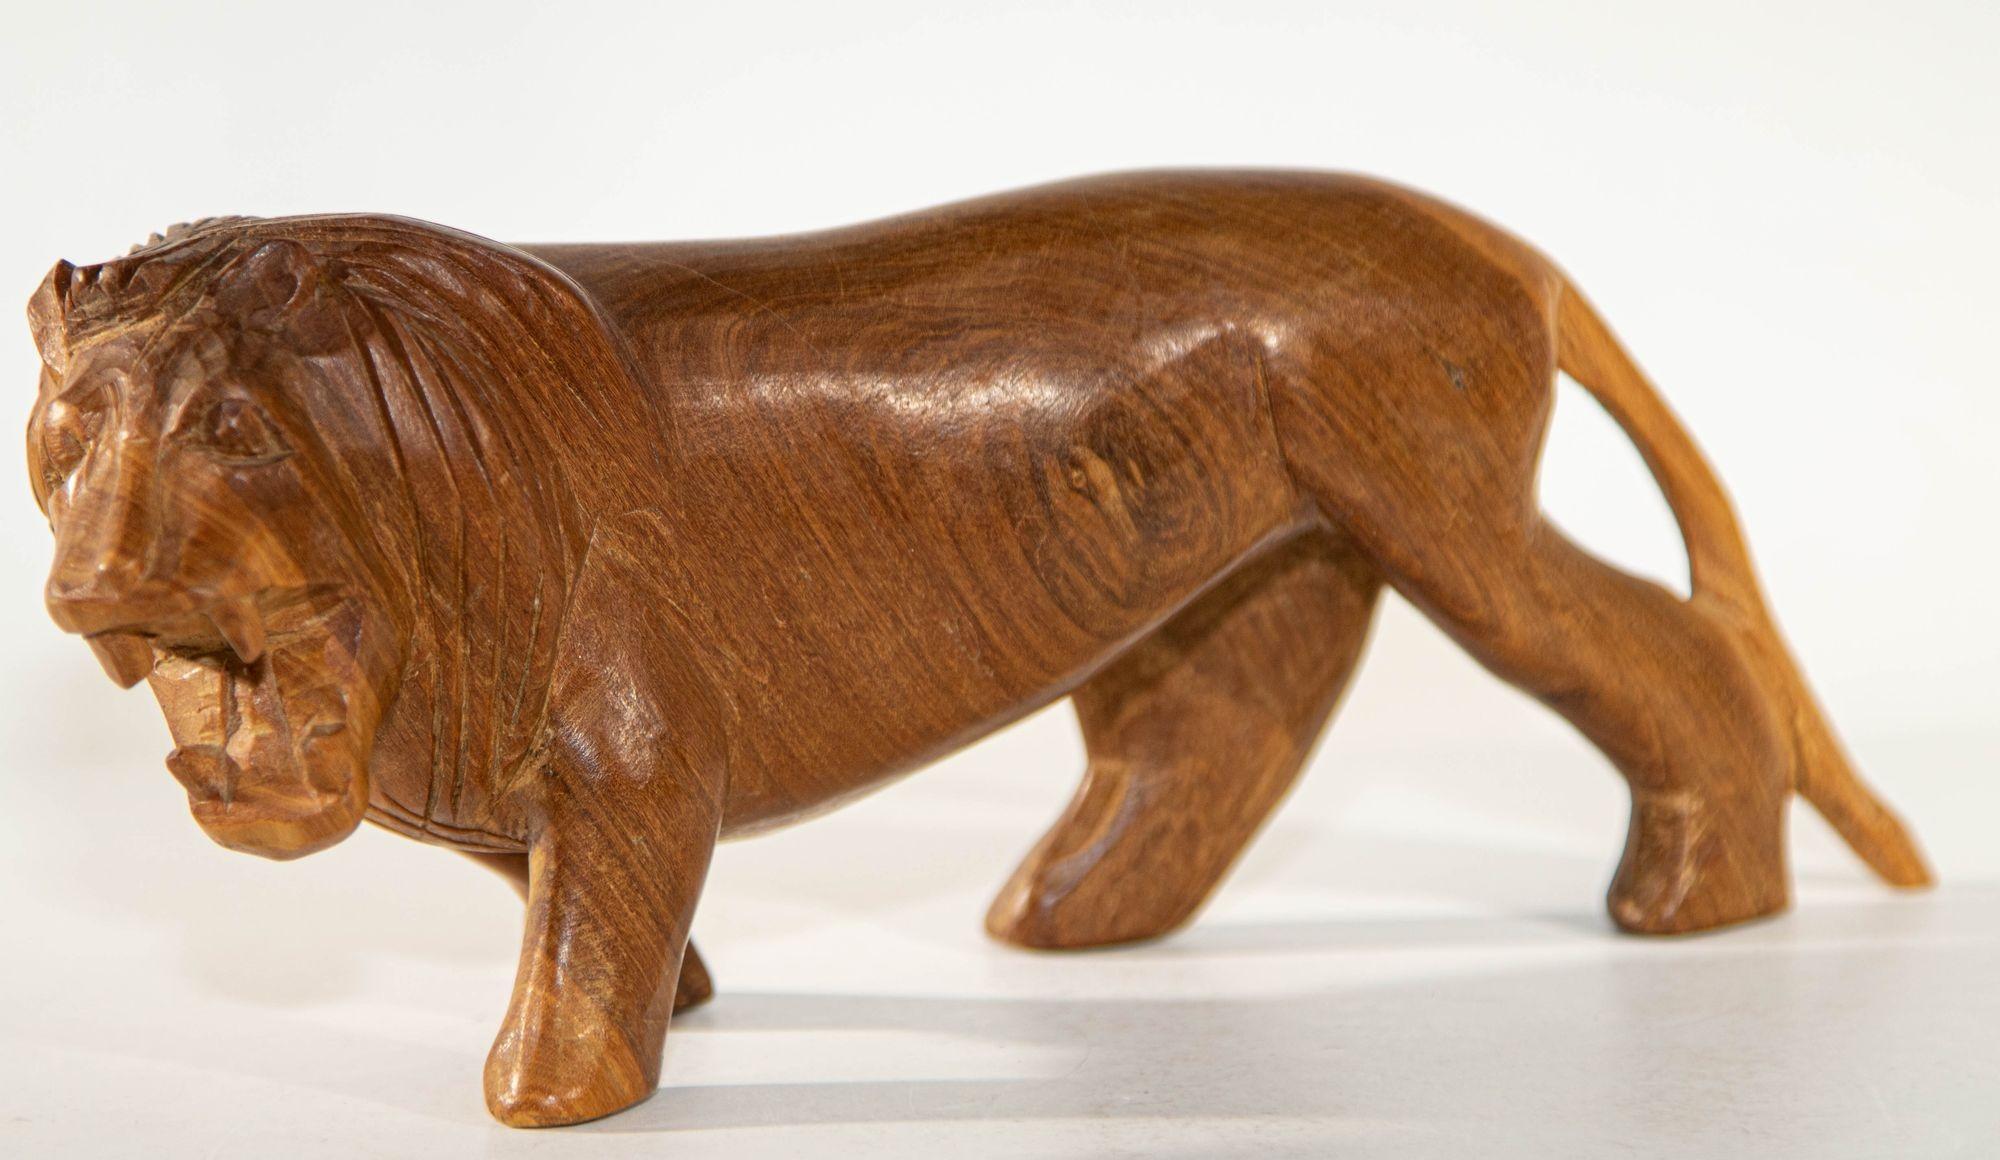 Vintage hand carved wooden lion sculpture, hand carved statue, wood carving, African animal figurine, safari, Kenya African Decor Safari Animal Figure. handcrafted exotic home decor, ornament.
handcrafted Lion statue, prowling Lion Figurine African